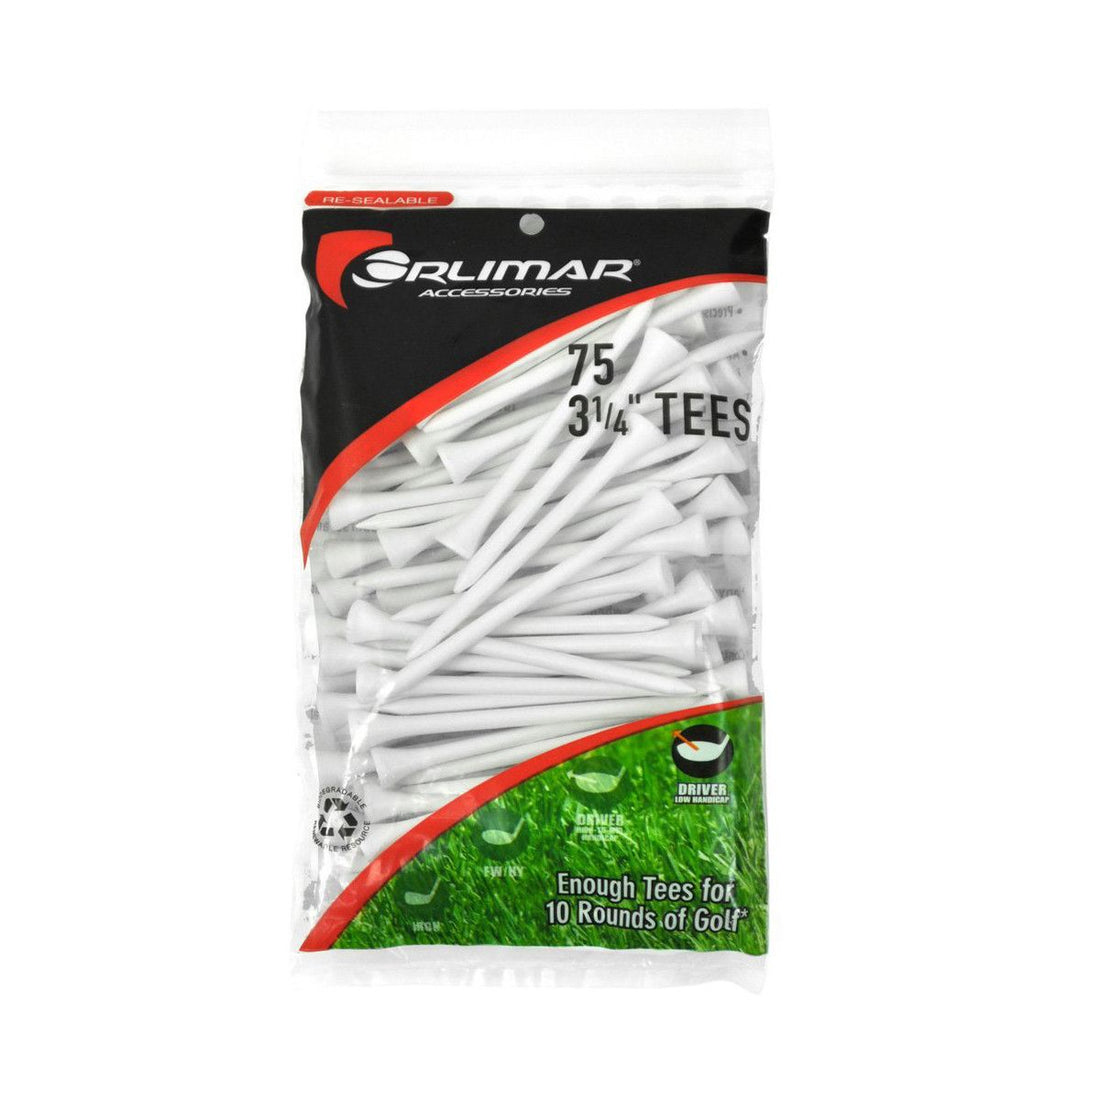 75 pack of 3 1/4" tall white Orlimar Wooden Golf Tees in resealable packaging